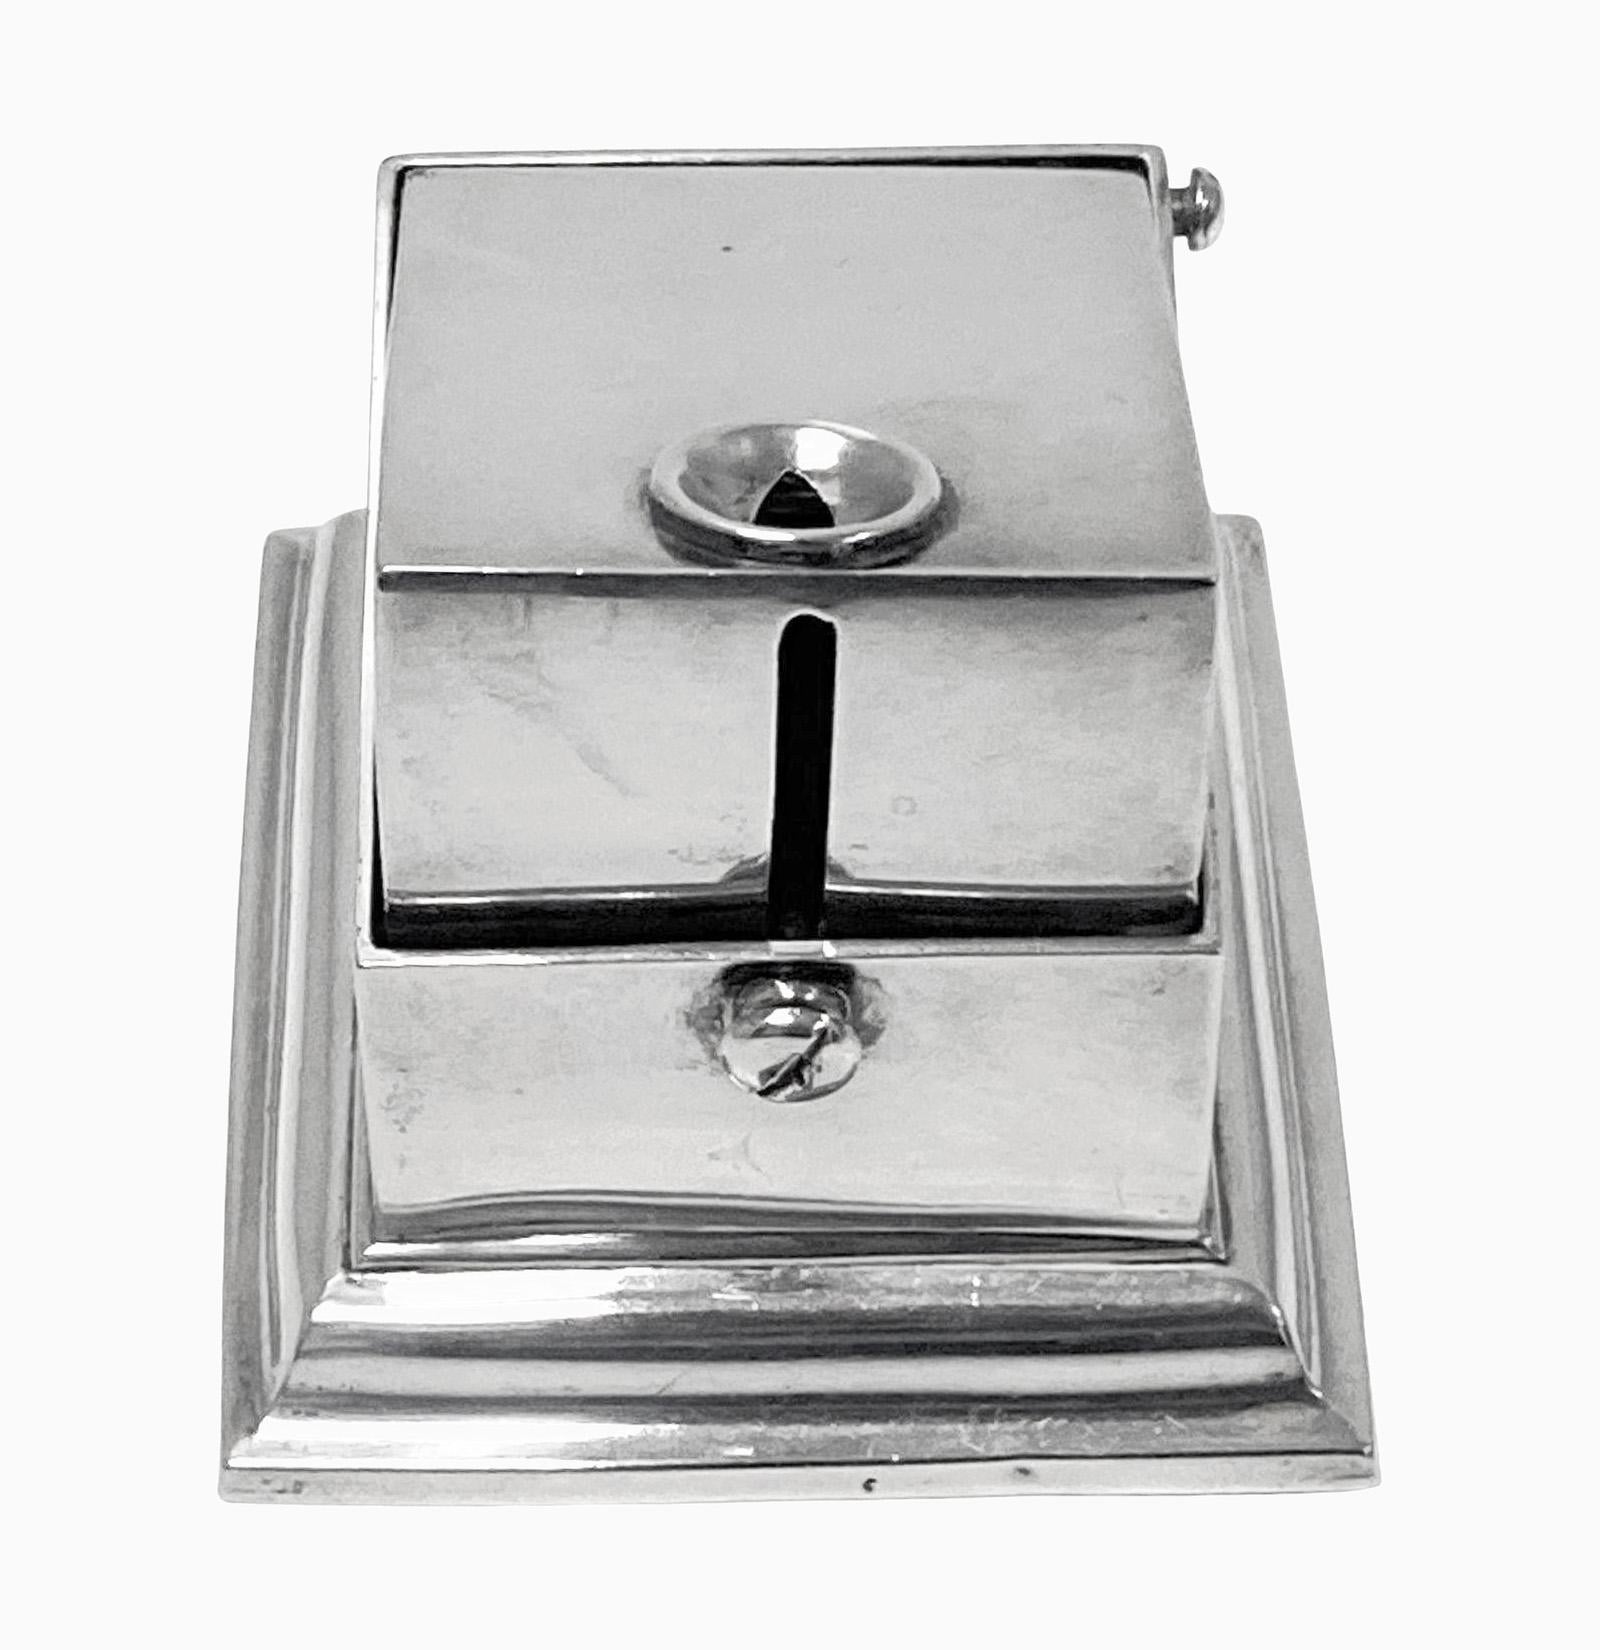 Antique Silver Table or Desk Cigar Cutter London 1903 W. H. Webber. Adjustable screw to allow access to cigar clippings. Cutting mechanism activated when pressed down from the top. Fully hallmarked. Measures: 3.5 x 3.0 x 2.25 inches.